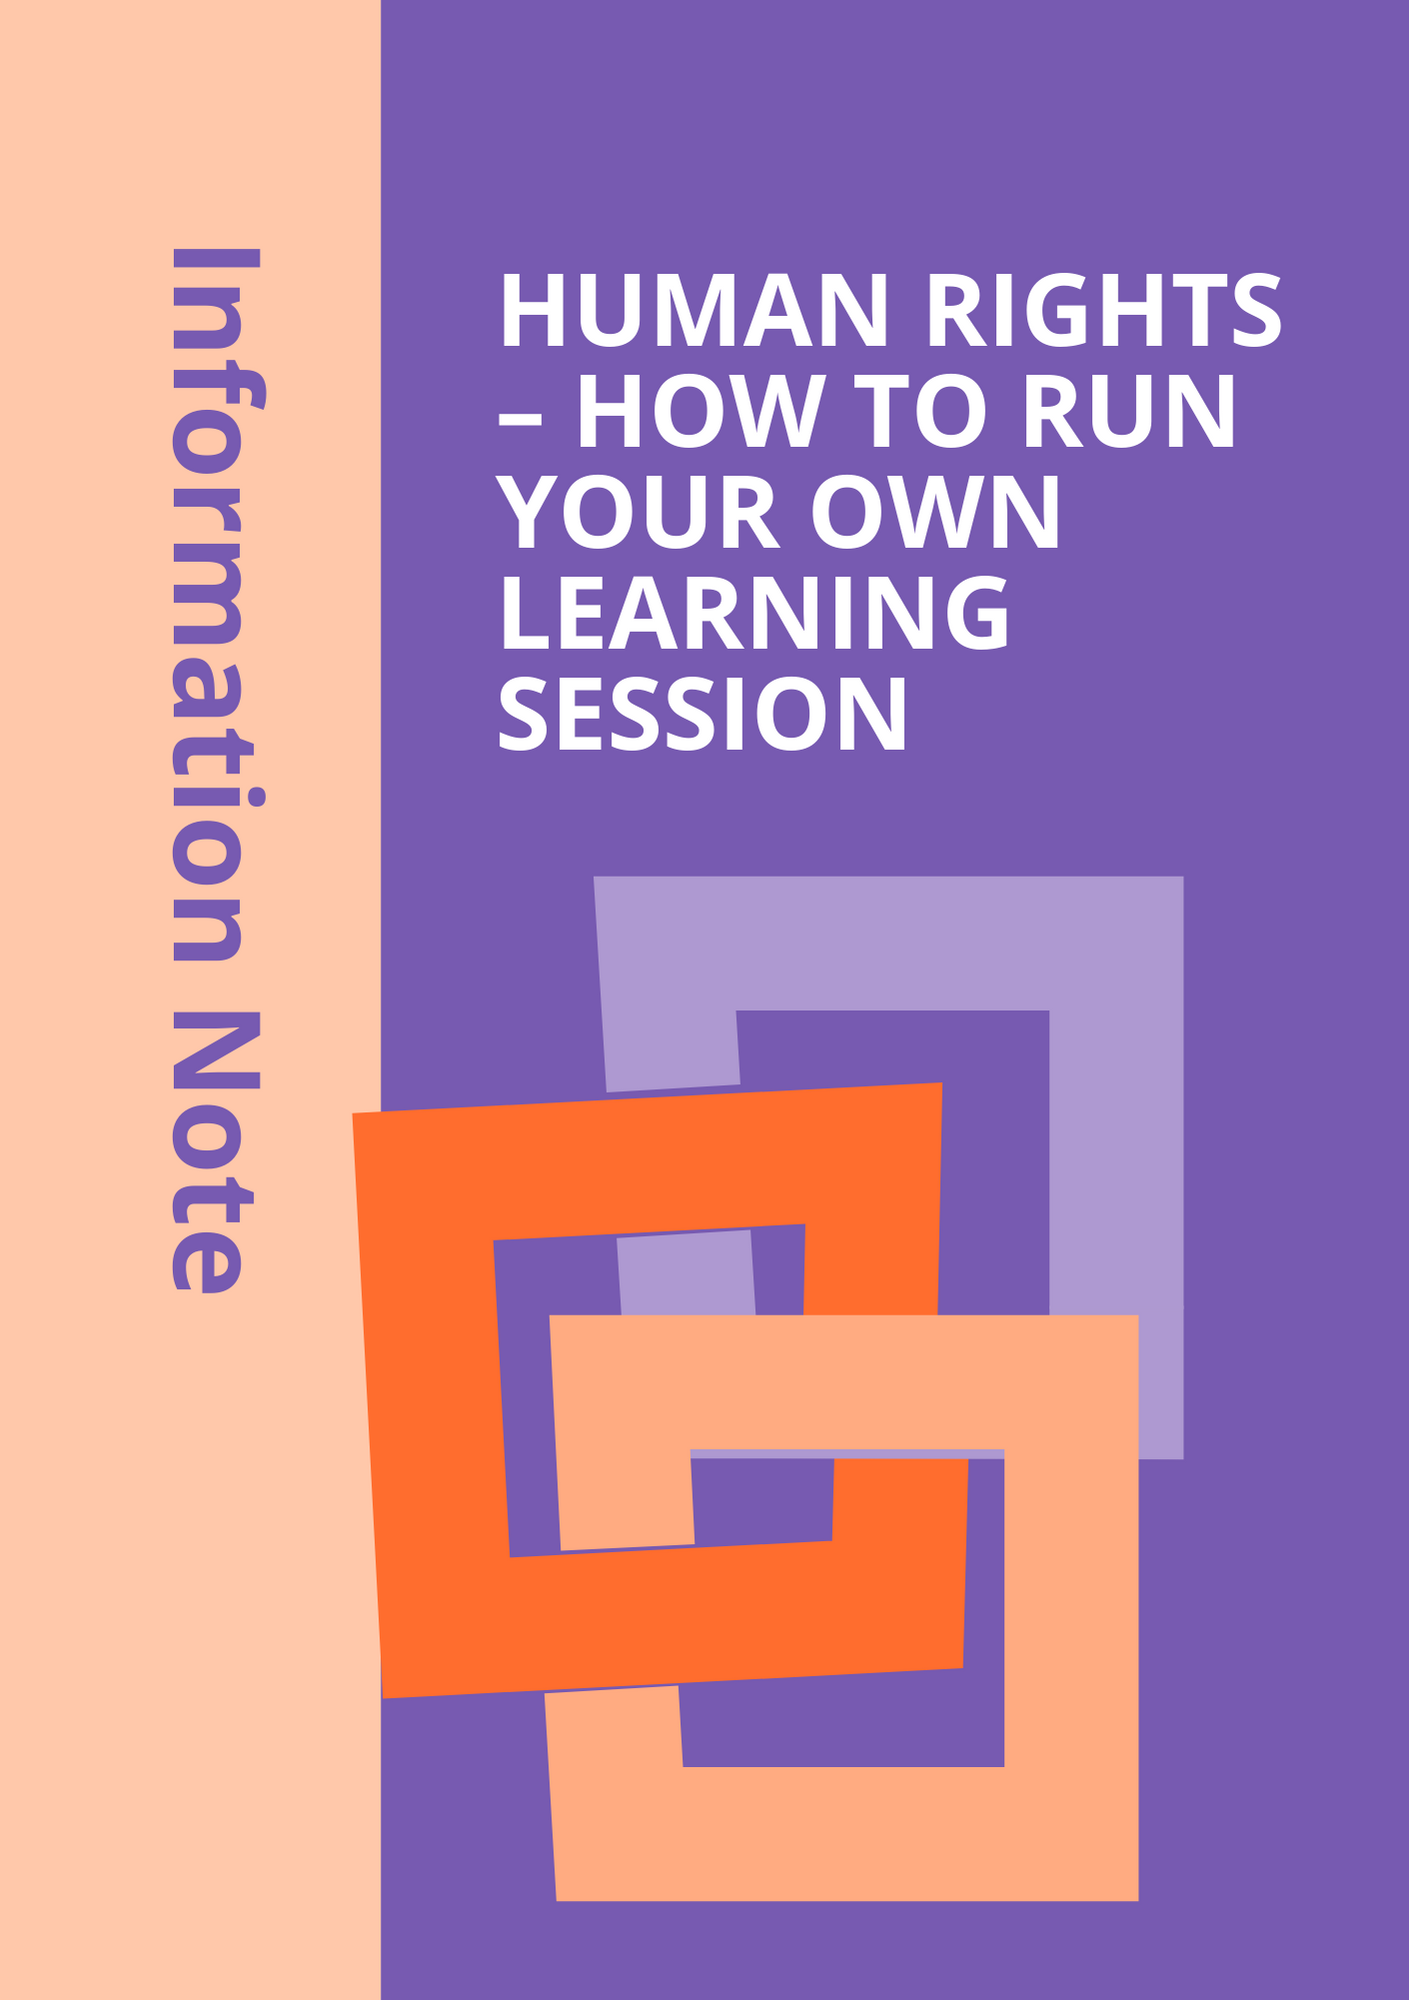 Human rights - how to run your own learning session